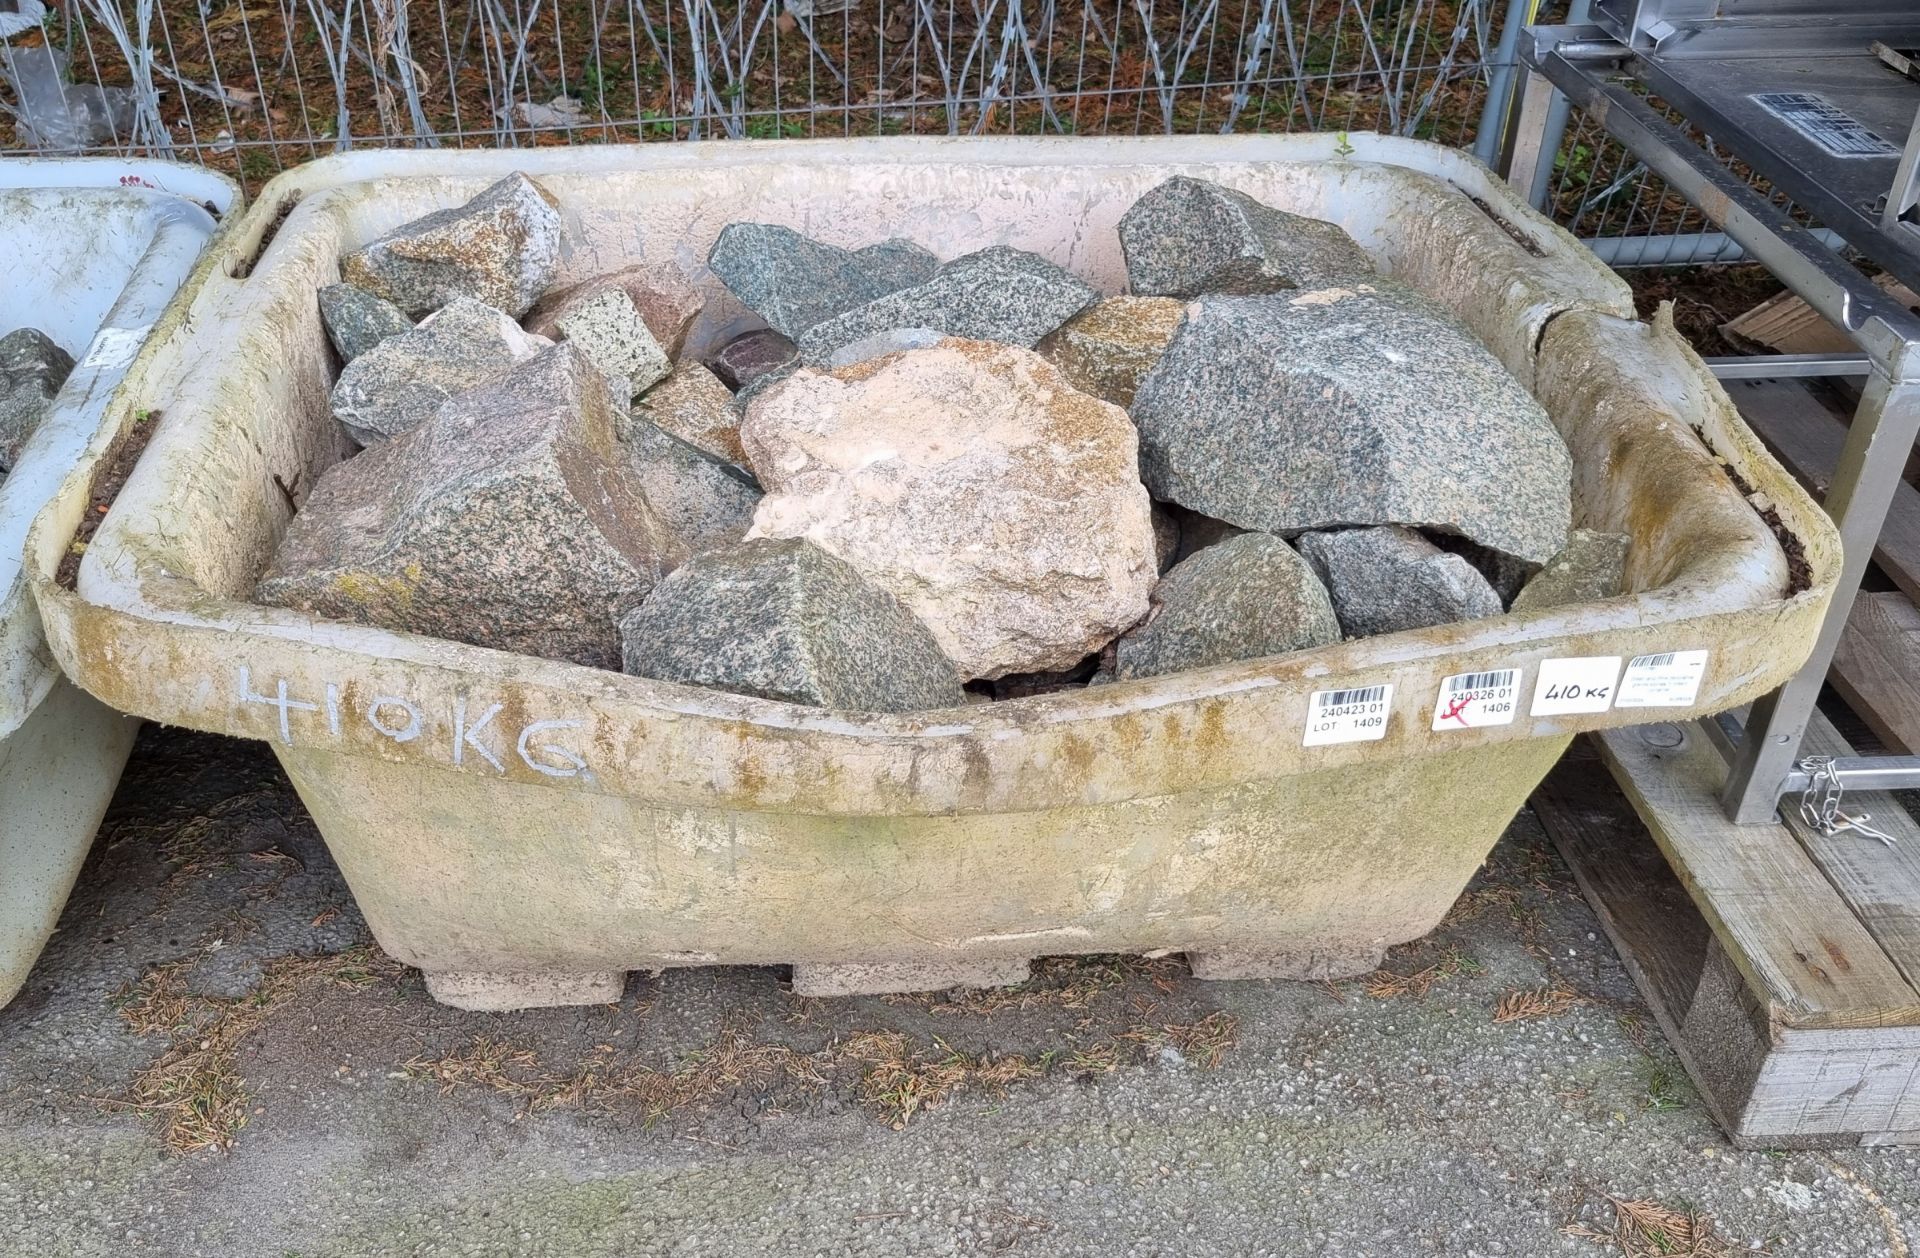 Green and Pink decorative granite stones in plastic container - 410kg